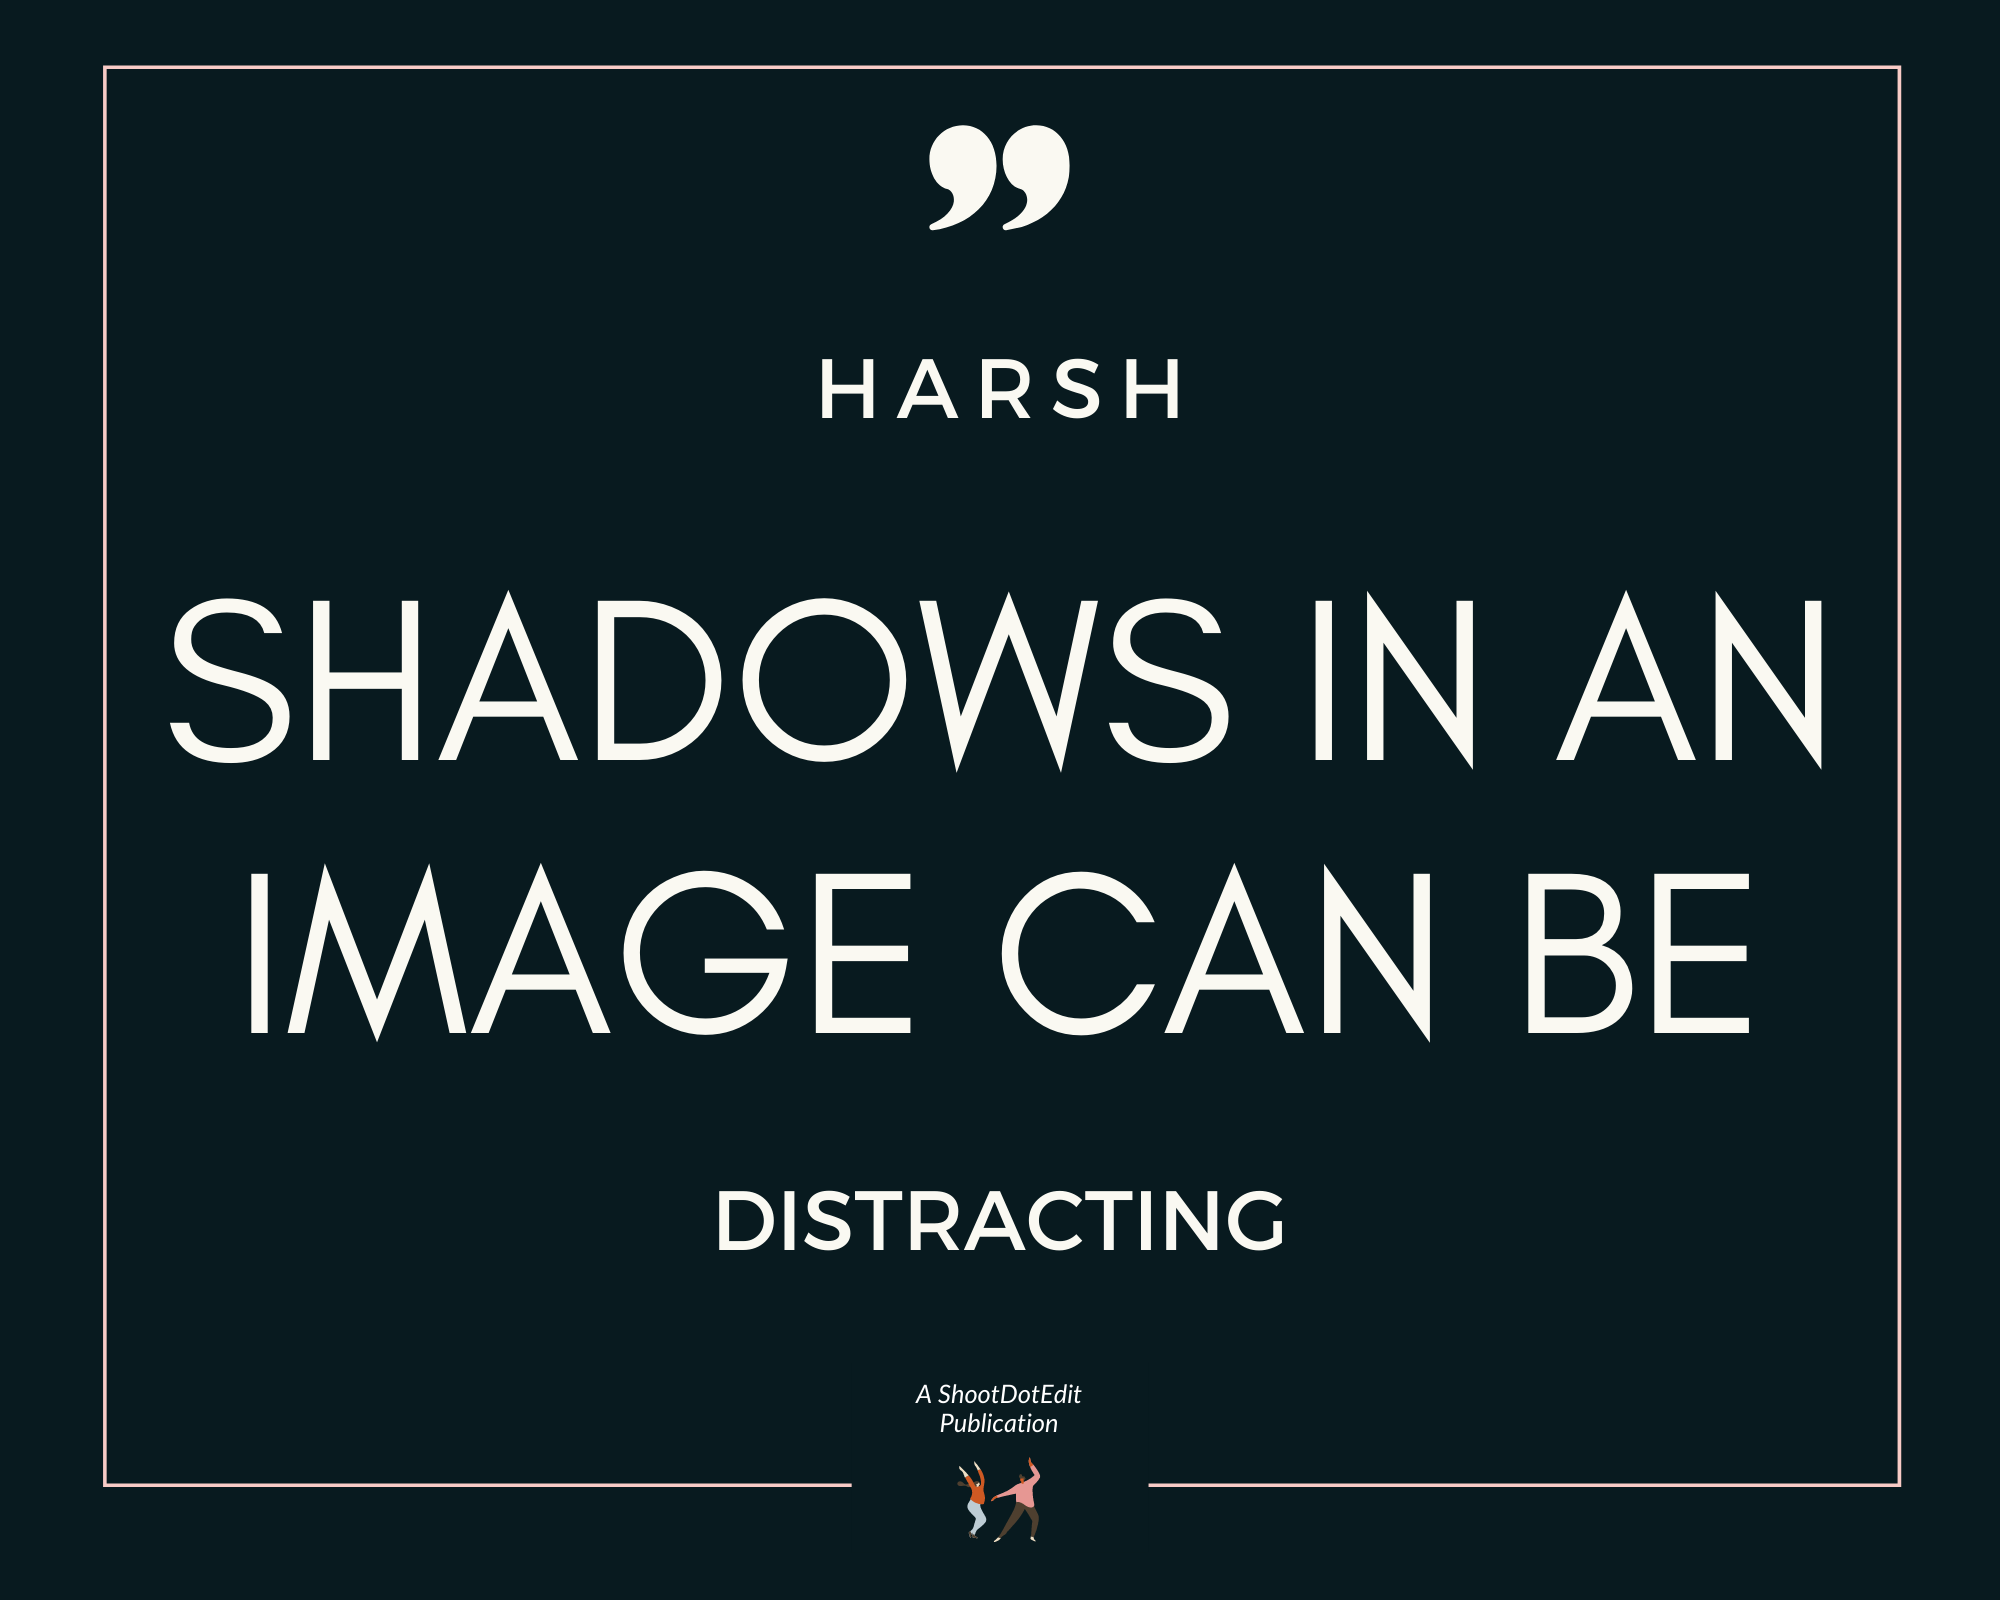 Infographic stating harsh shadows in an image can be distracting